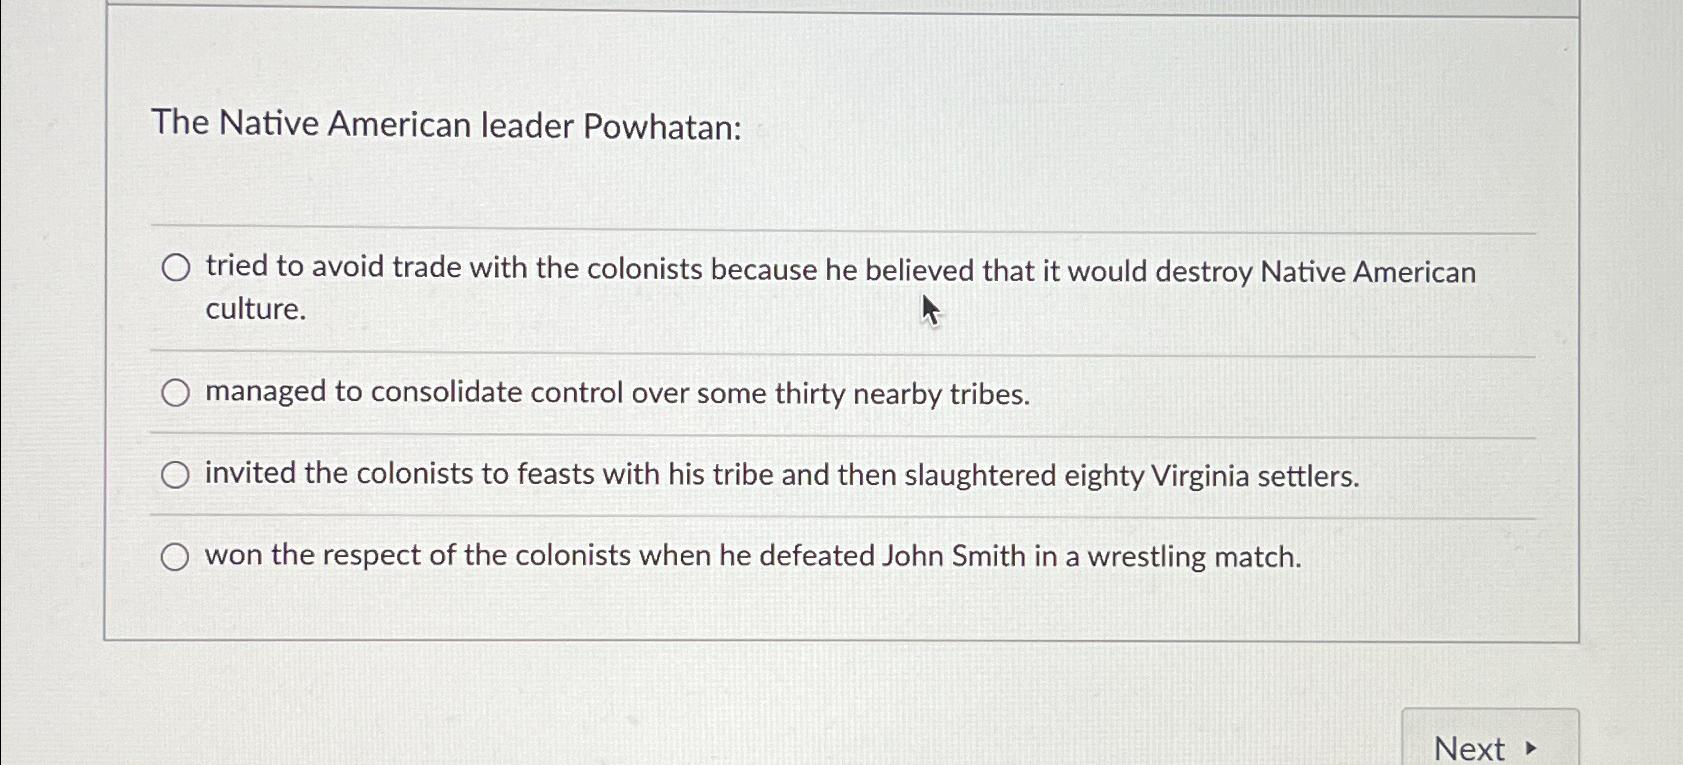 The Native American leader Powhatan: tried to avoid trade with the colonists because he believed that it